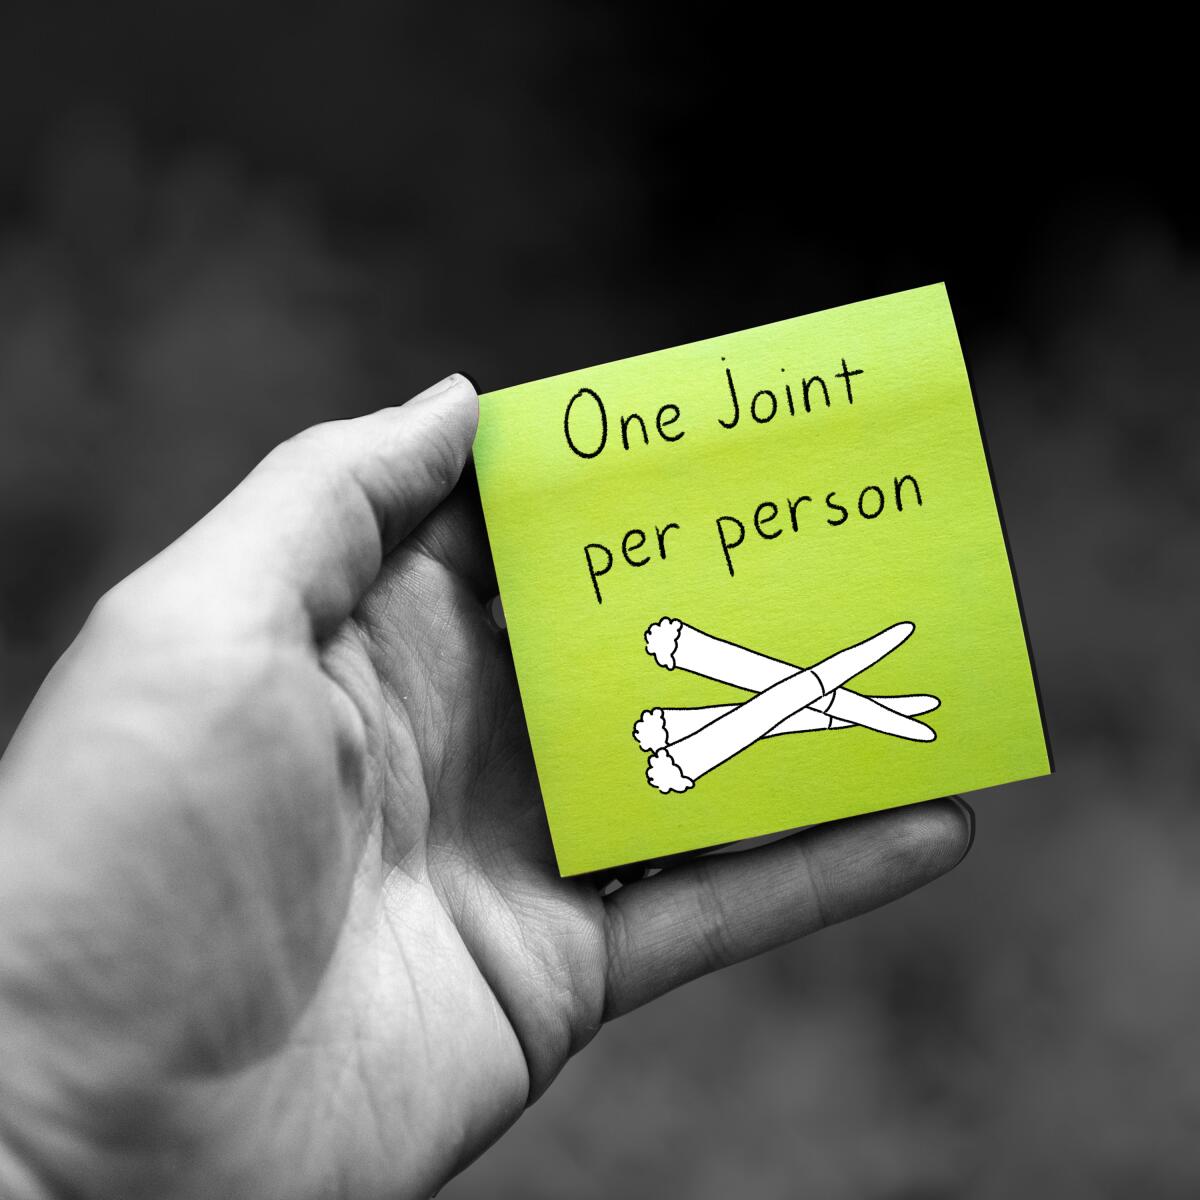 Post-it note that says "One joint per person"